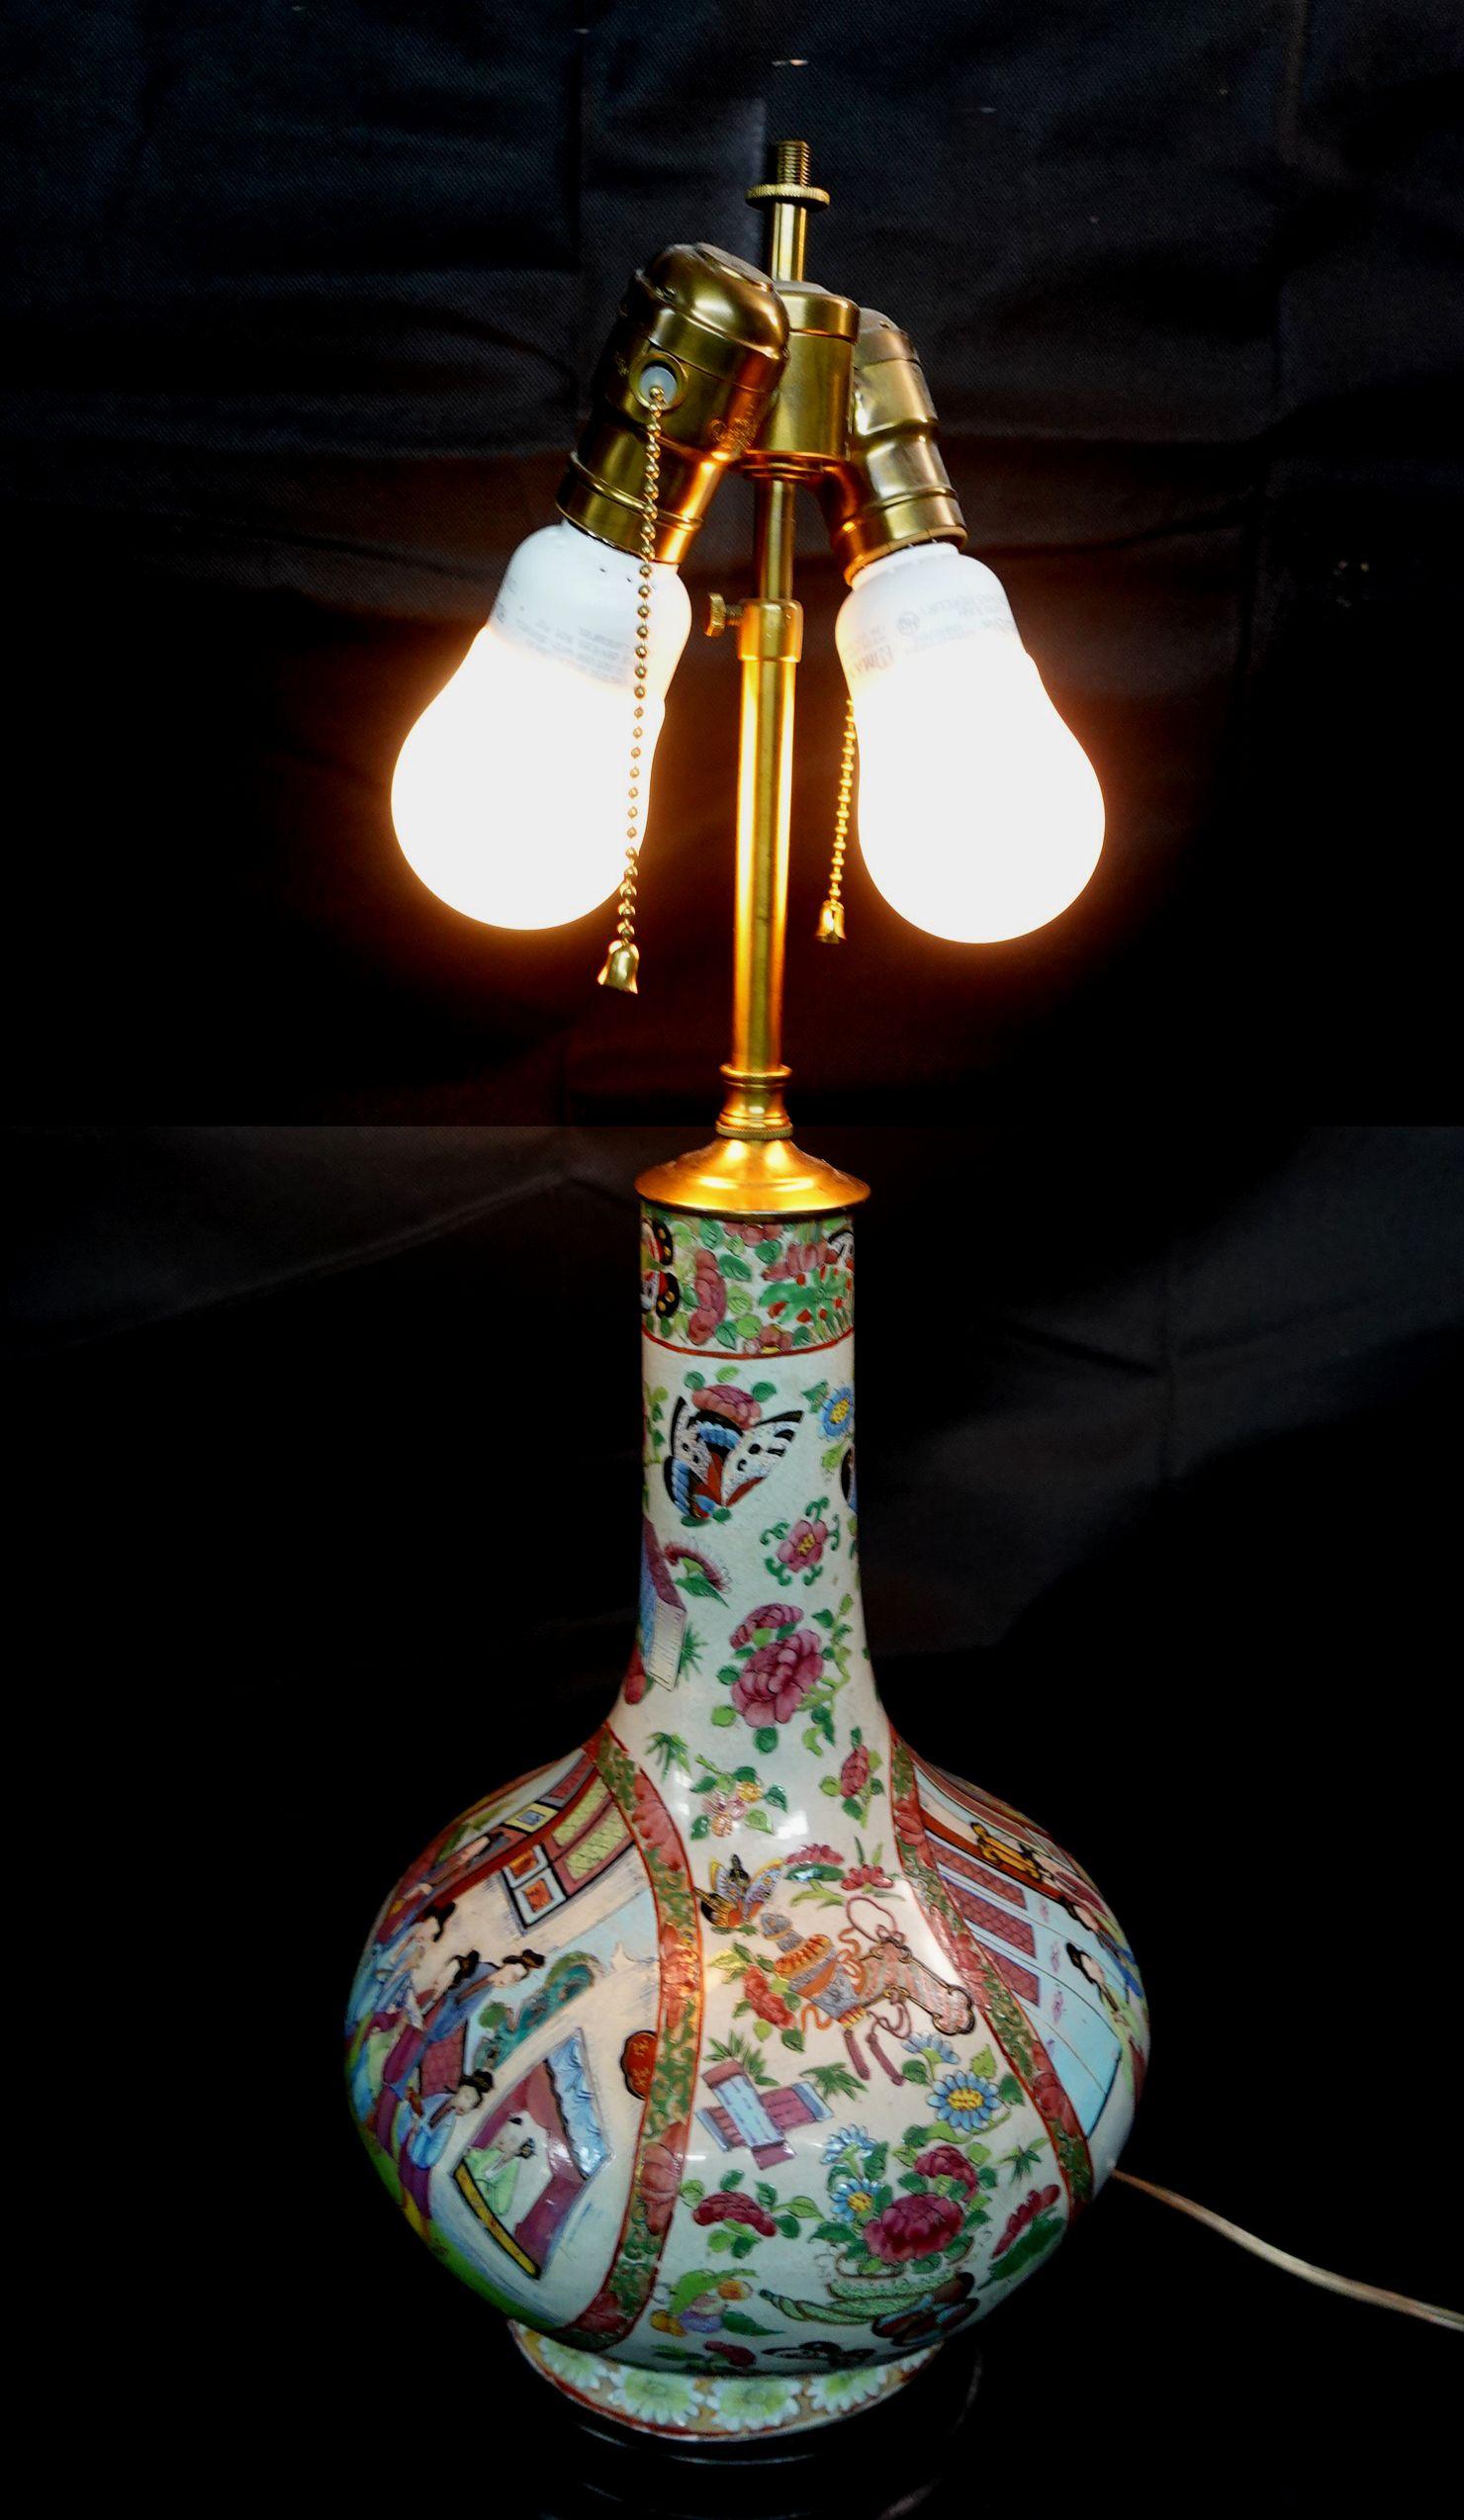 Japanese Famille Rose Export Porcelain Water Bottle Lamp Early 19th Century For Sale